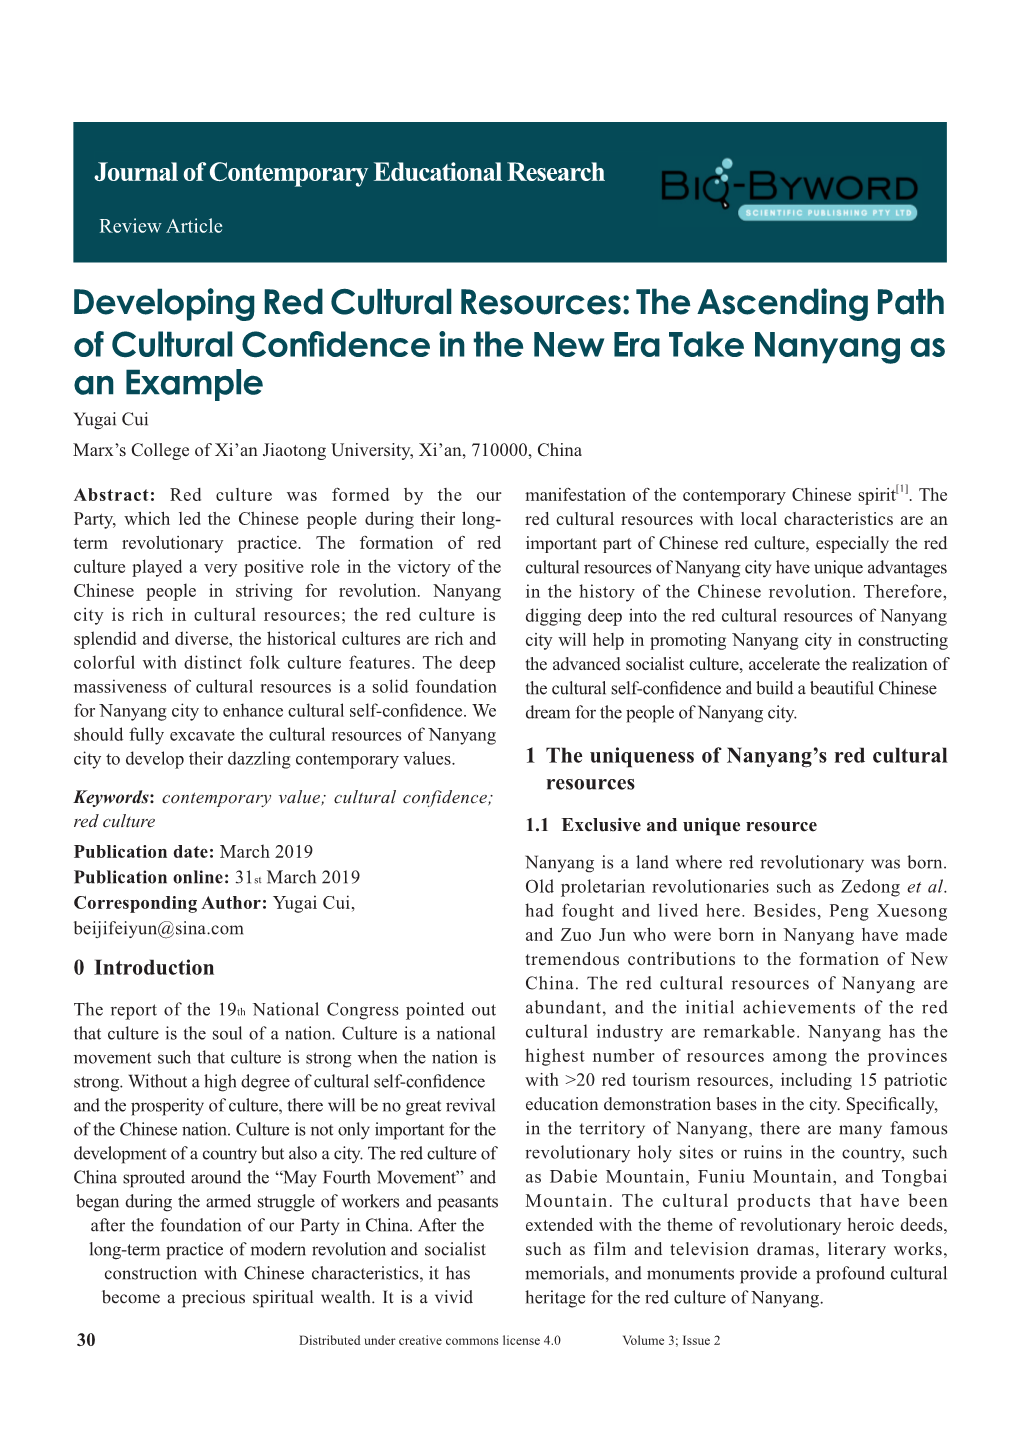 Of Cultural Confidence in the New Era Take Nanyang As an Example Developing Red Cultural Resources: the Ascending Path